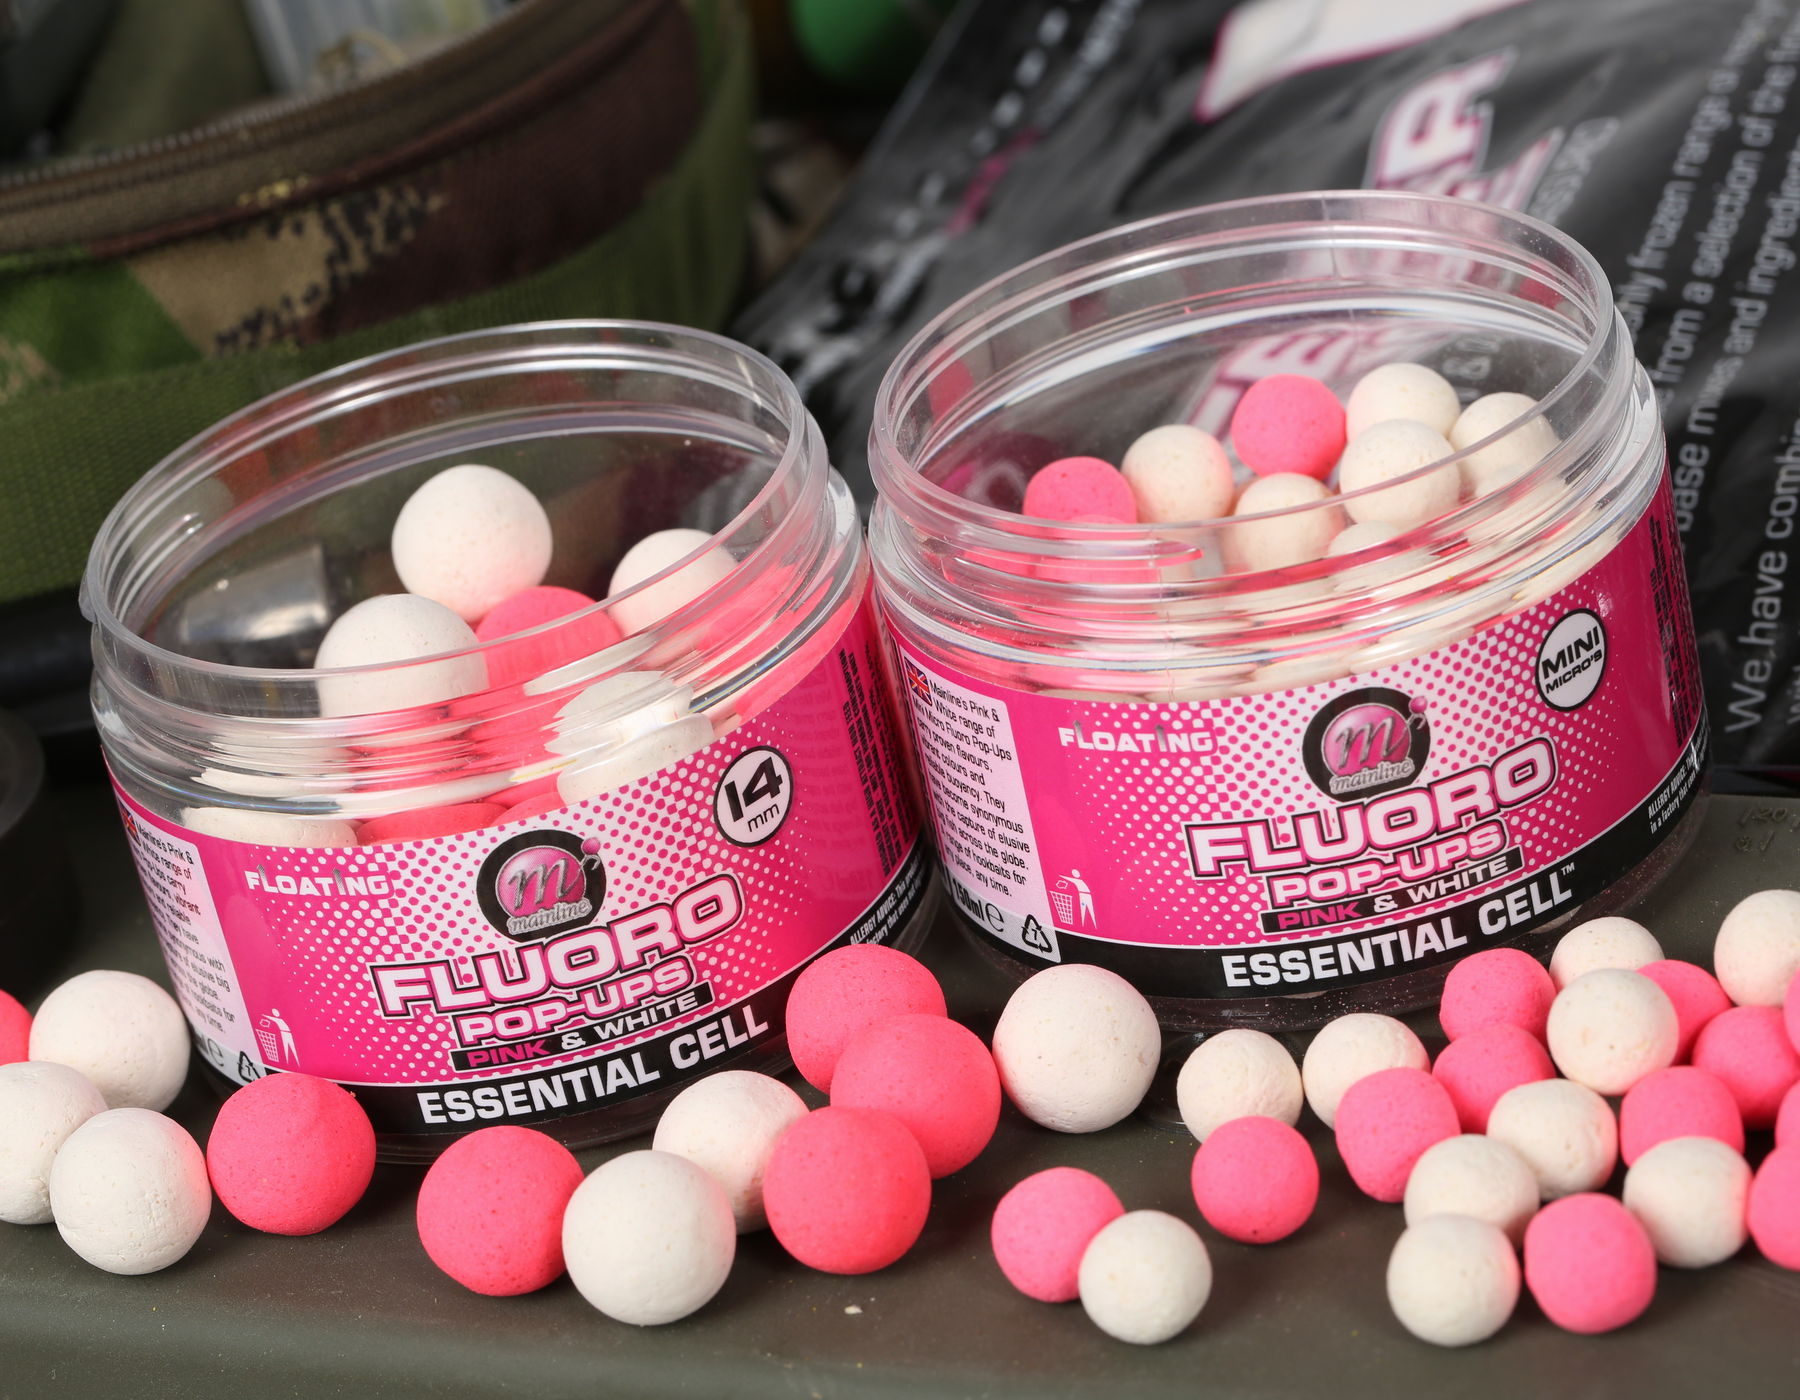 MAINLINE POP-UPS FLOURO CELL (PINK & WHITE) 8MM - Click Image to Close